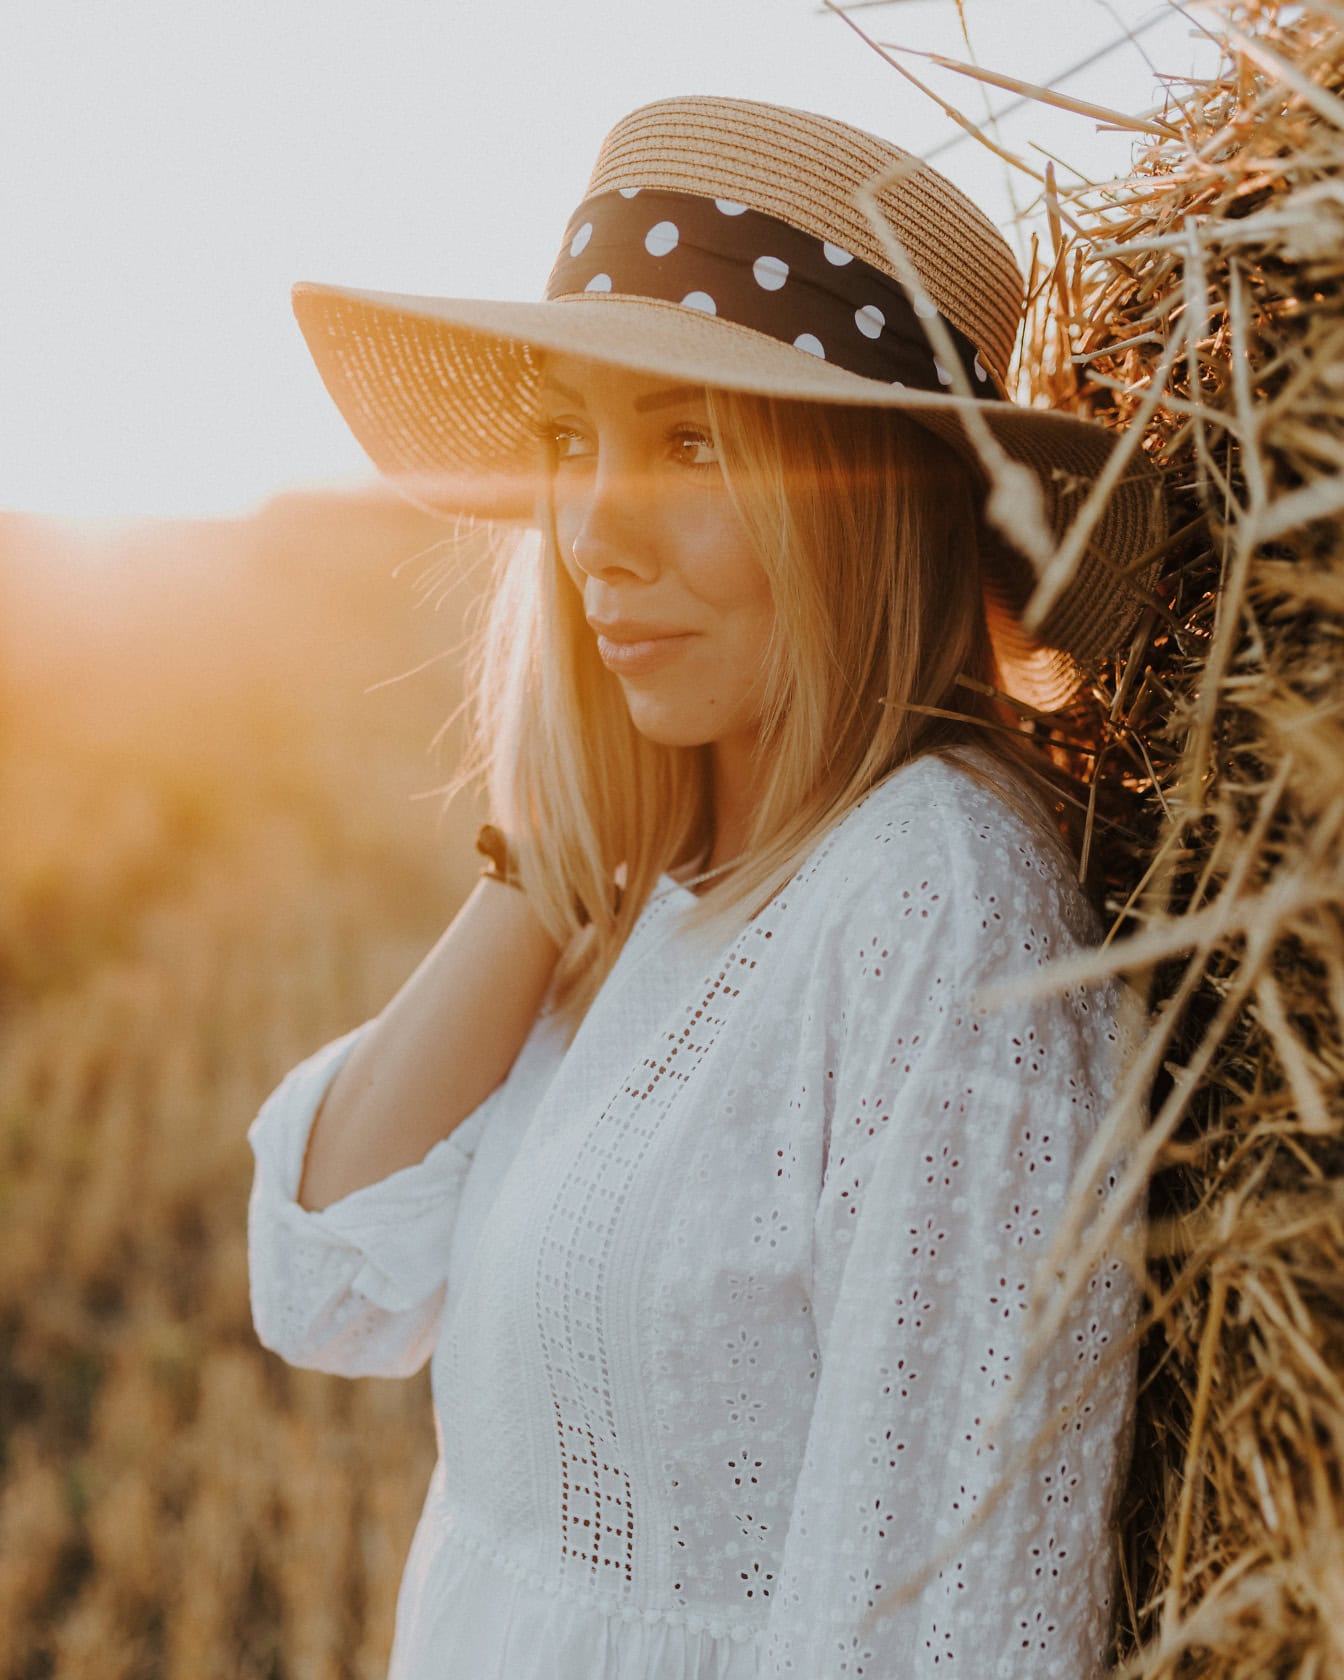 A portrait of beautiful blonde cowgirl in a white country dress and straw hat while sunbathes in a wheat field leaning against a haystack